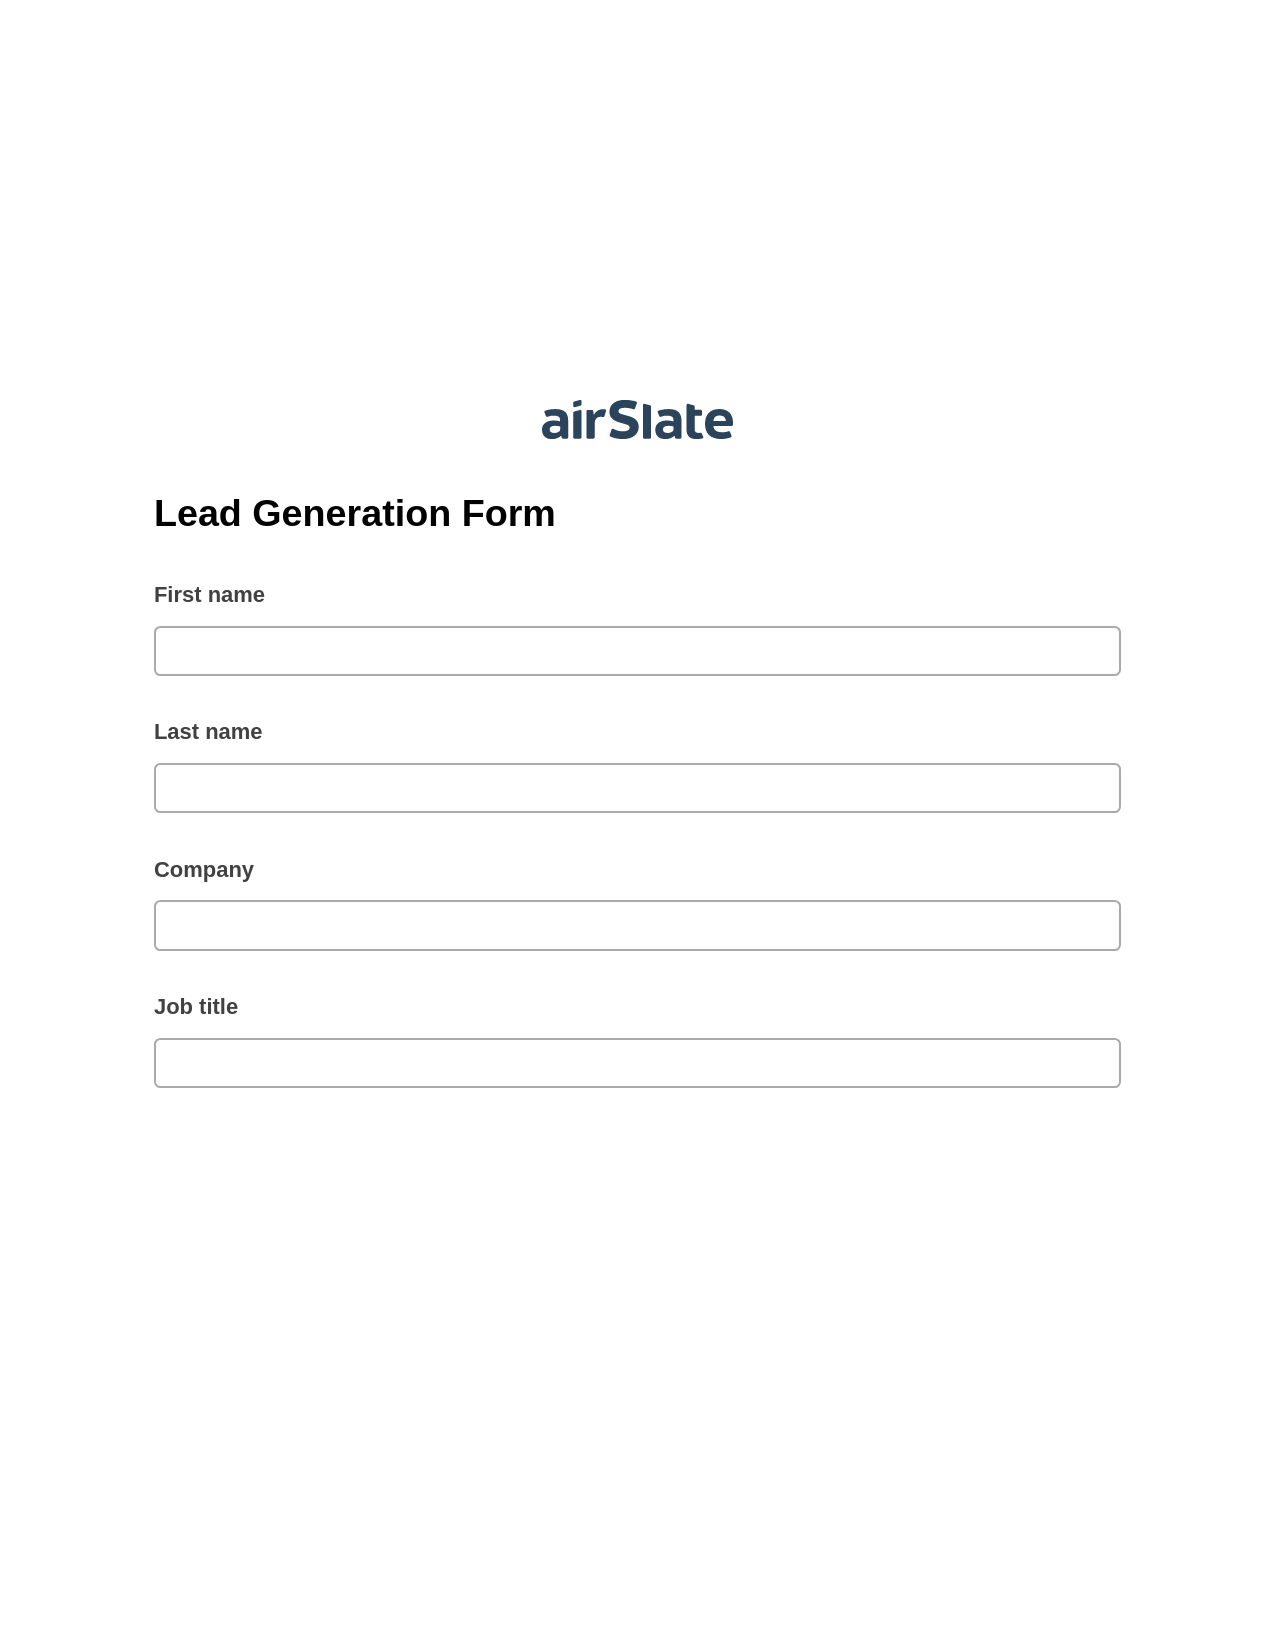 Lead Generation Form Pre-fill from Litmos bot, Send a Slate to Salesforce Contact Bot, Archive to Box Bot